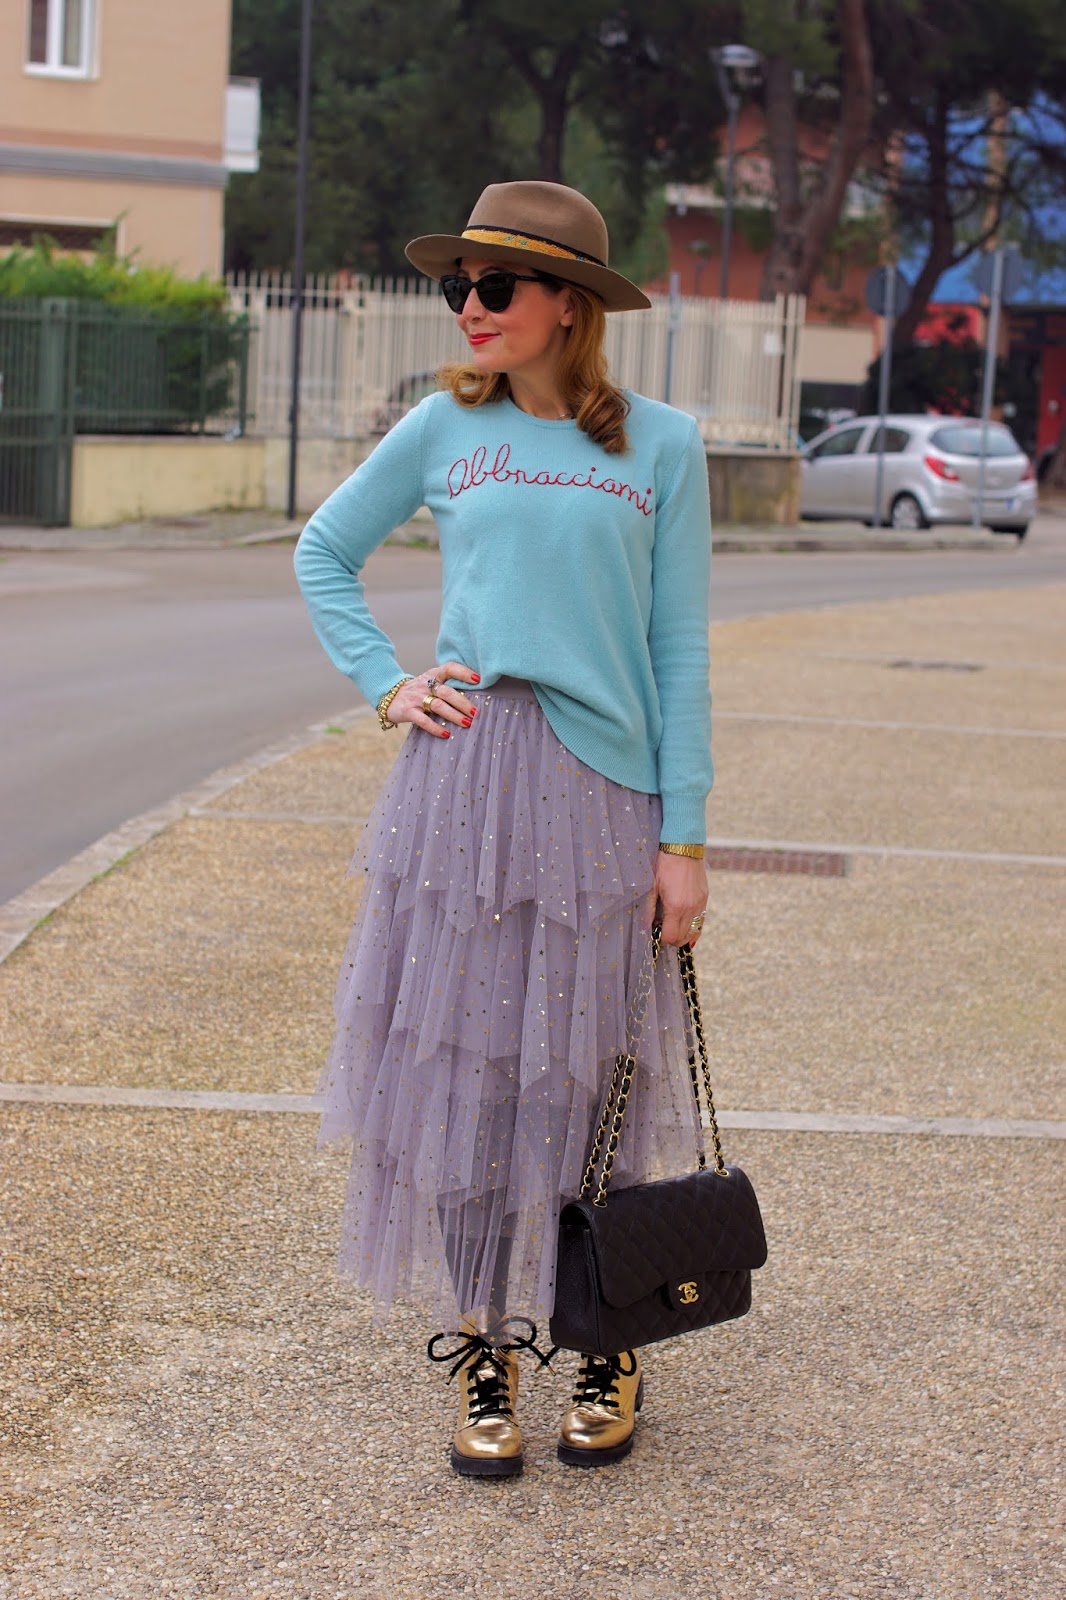 Tulle skirt and Combat boots outfit idea on Fashion and Cookies fashion blog, fashion blogger style